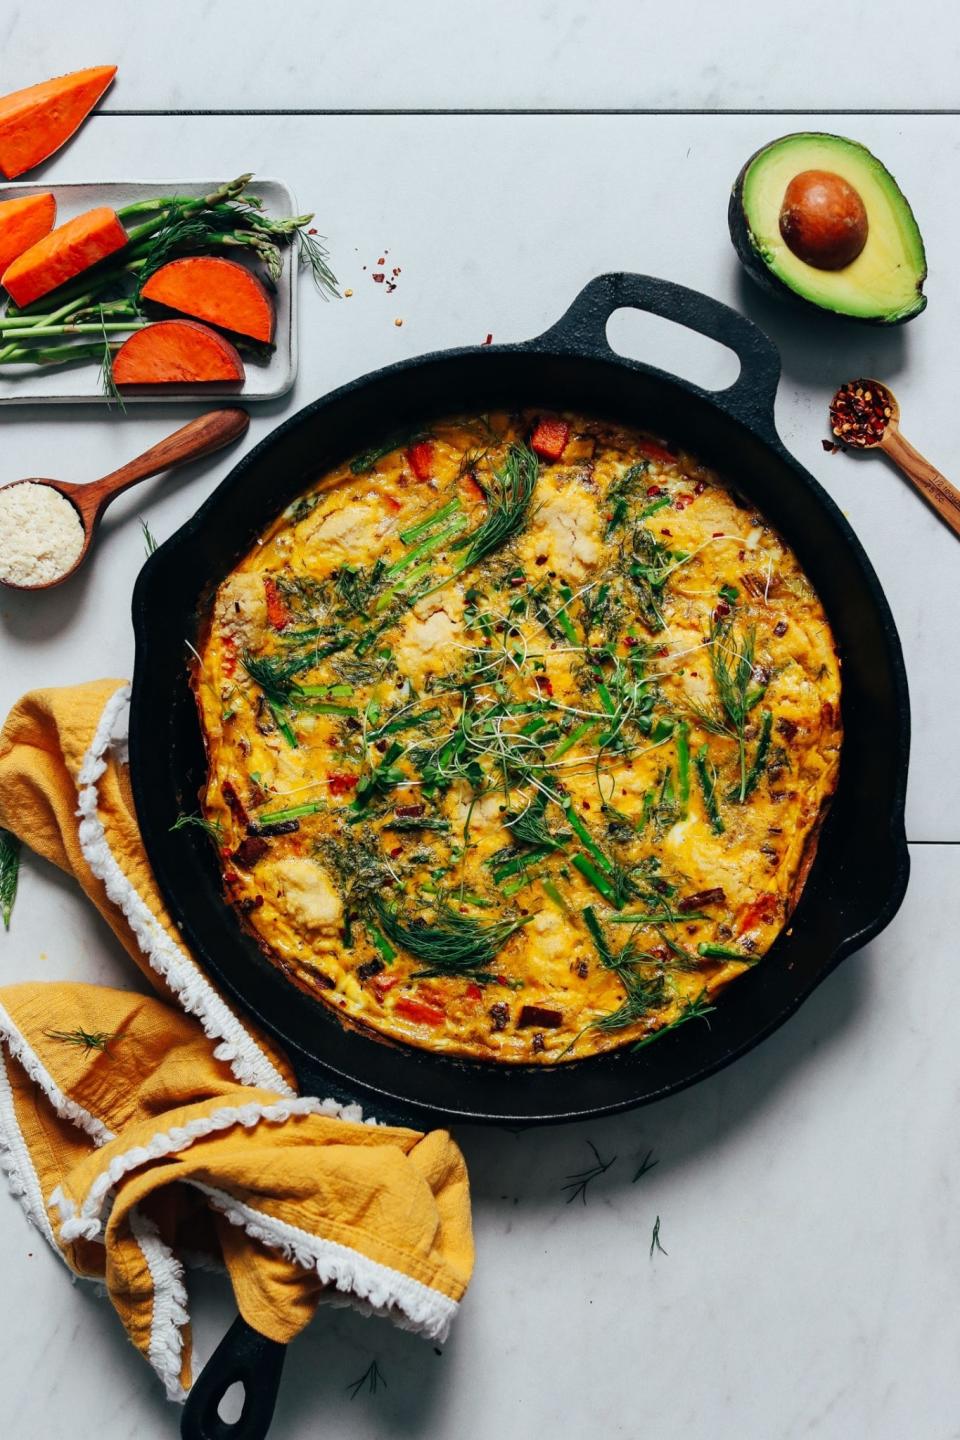 A skillet with a cooked frittata garnished with herbs, surrounded by raw ingredients